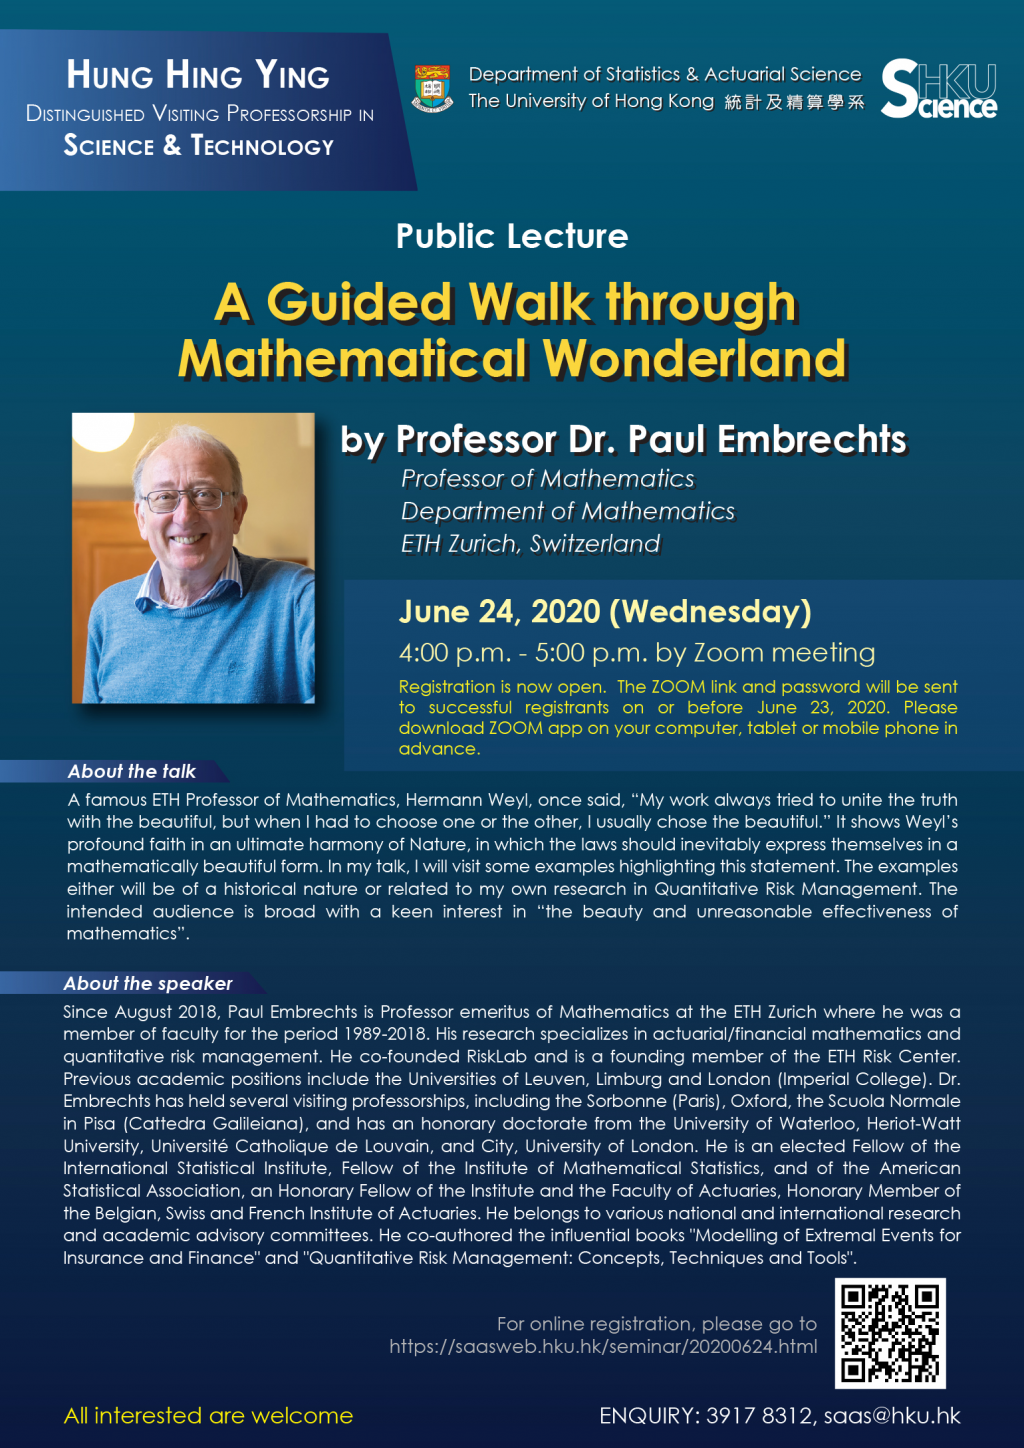 Hung Hing-Ying Distinguished Visiting Professorship in Science & Technology: Public Lecture 'A Guided Walk through Mathematical Wonderland'